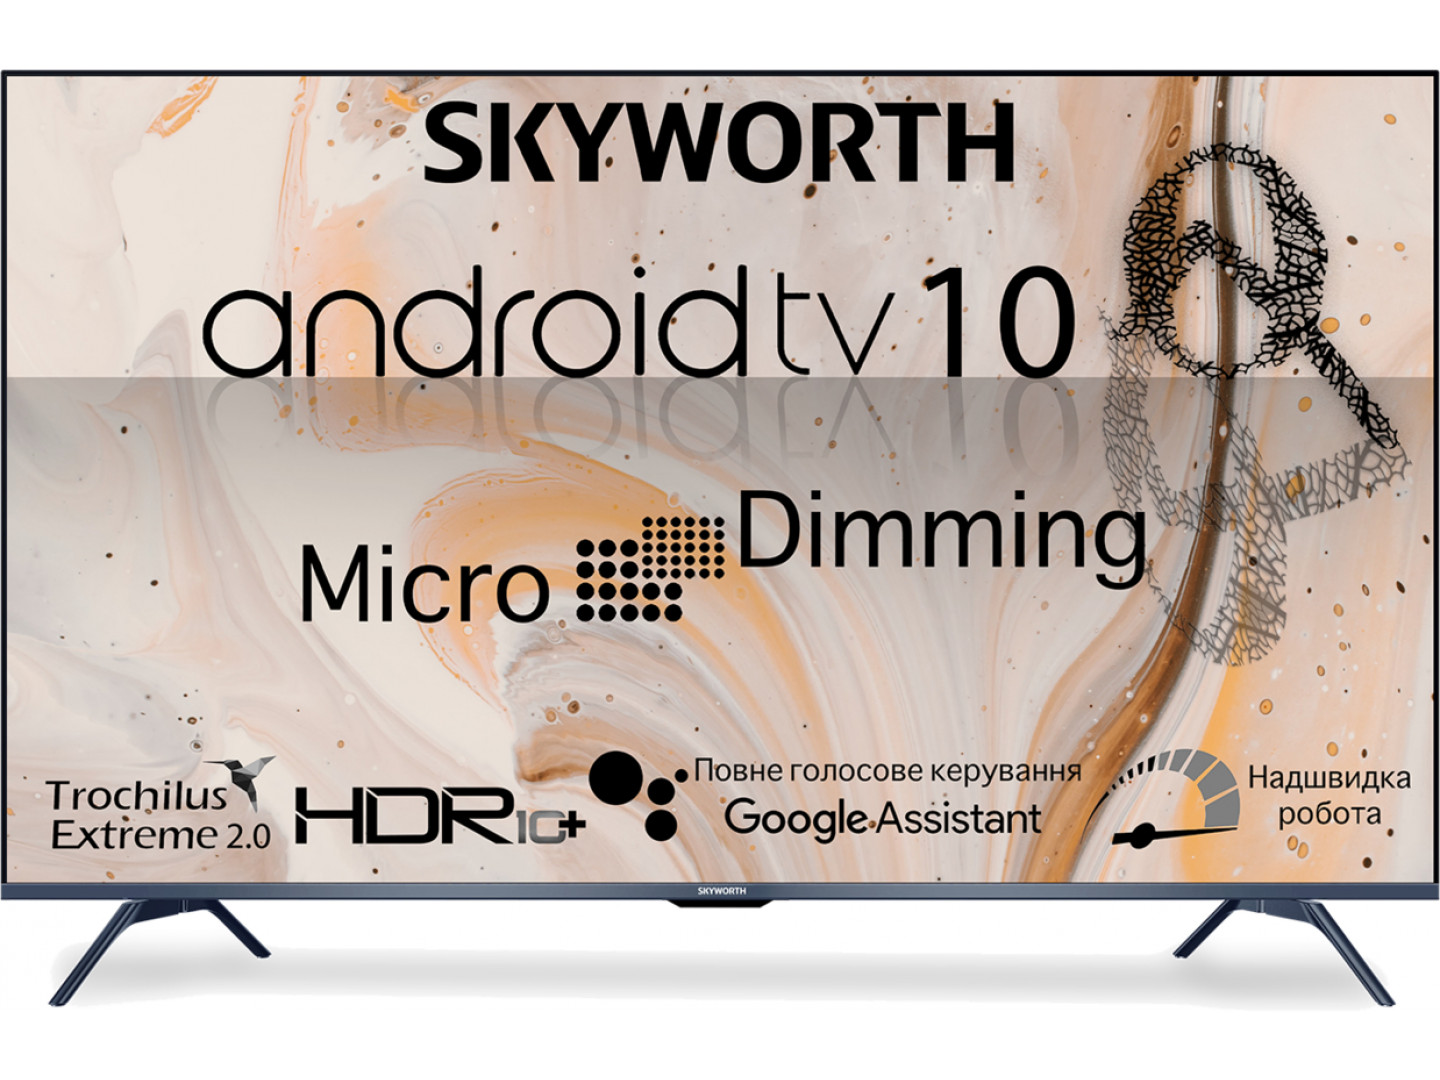 Фото - Телевізор Skyworth 43G3A AI Micro Dimming Android TV 10.0